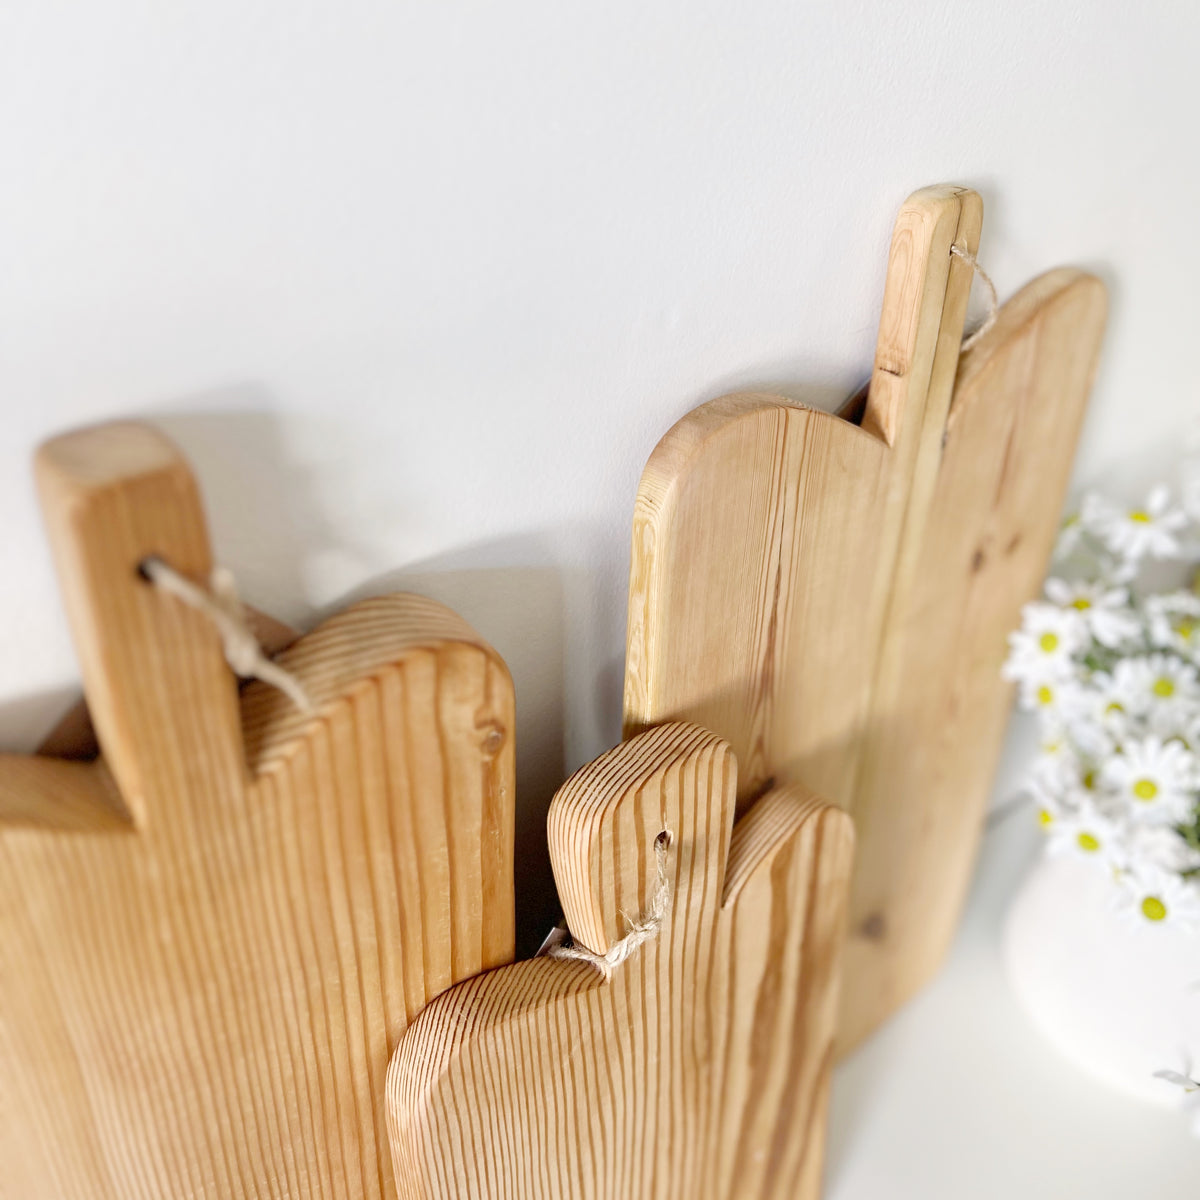 Ivy Alice | Serving Board with curved corners | Narrow